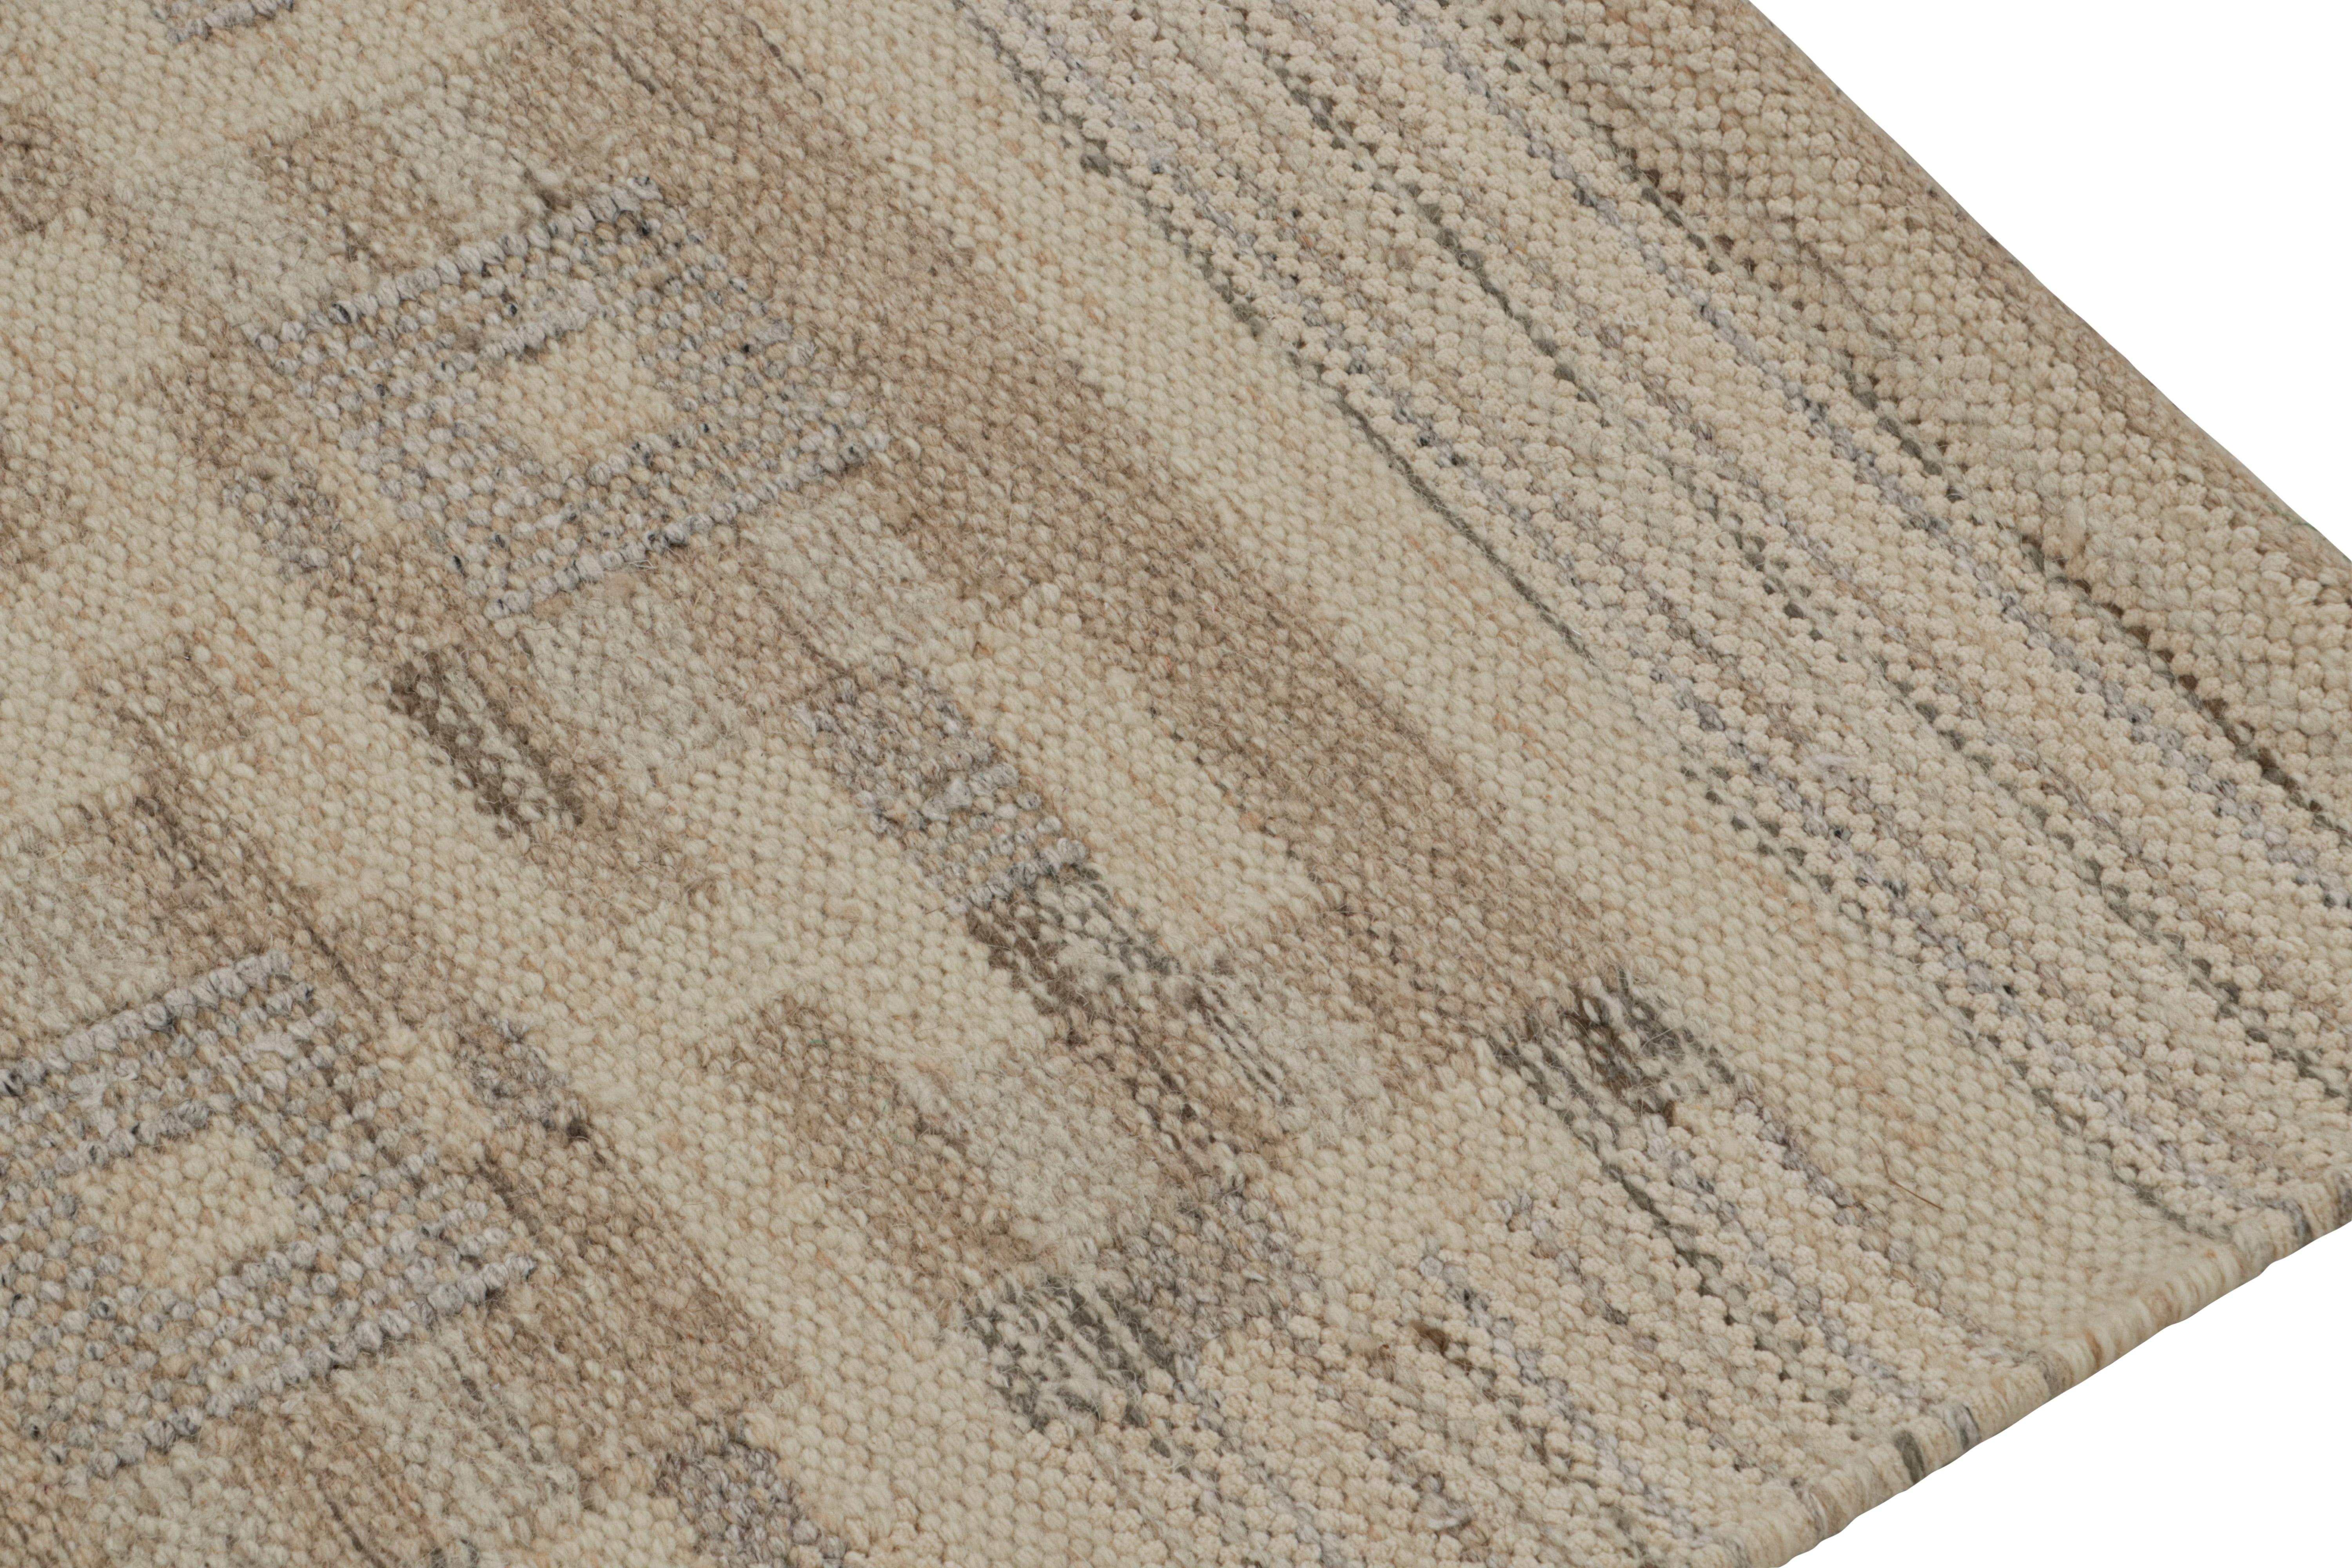 Hand-Woven Rug & Kilim’s Scandinavian Style Kilim in Beige-Brown & gray Patterns For Sale